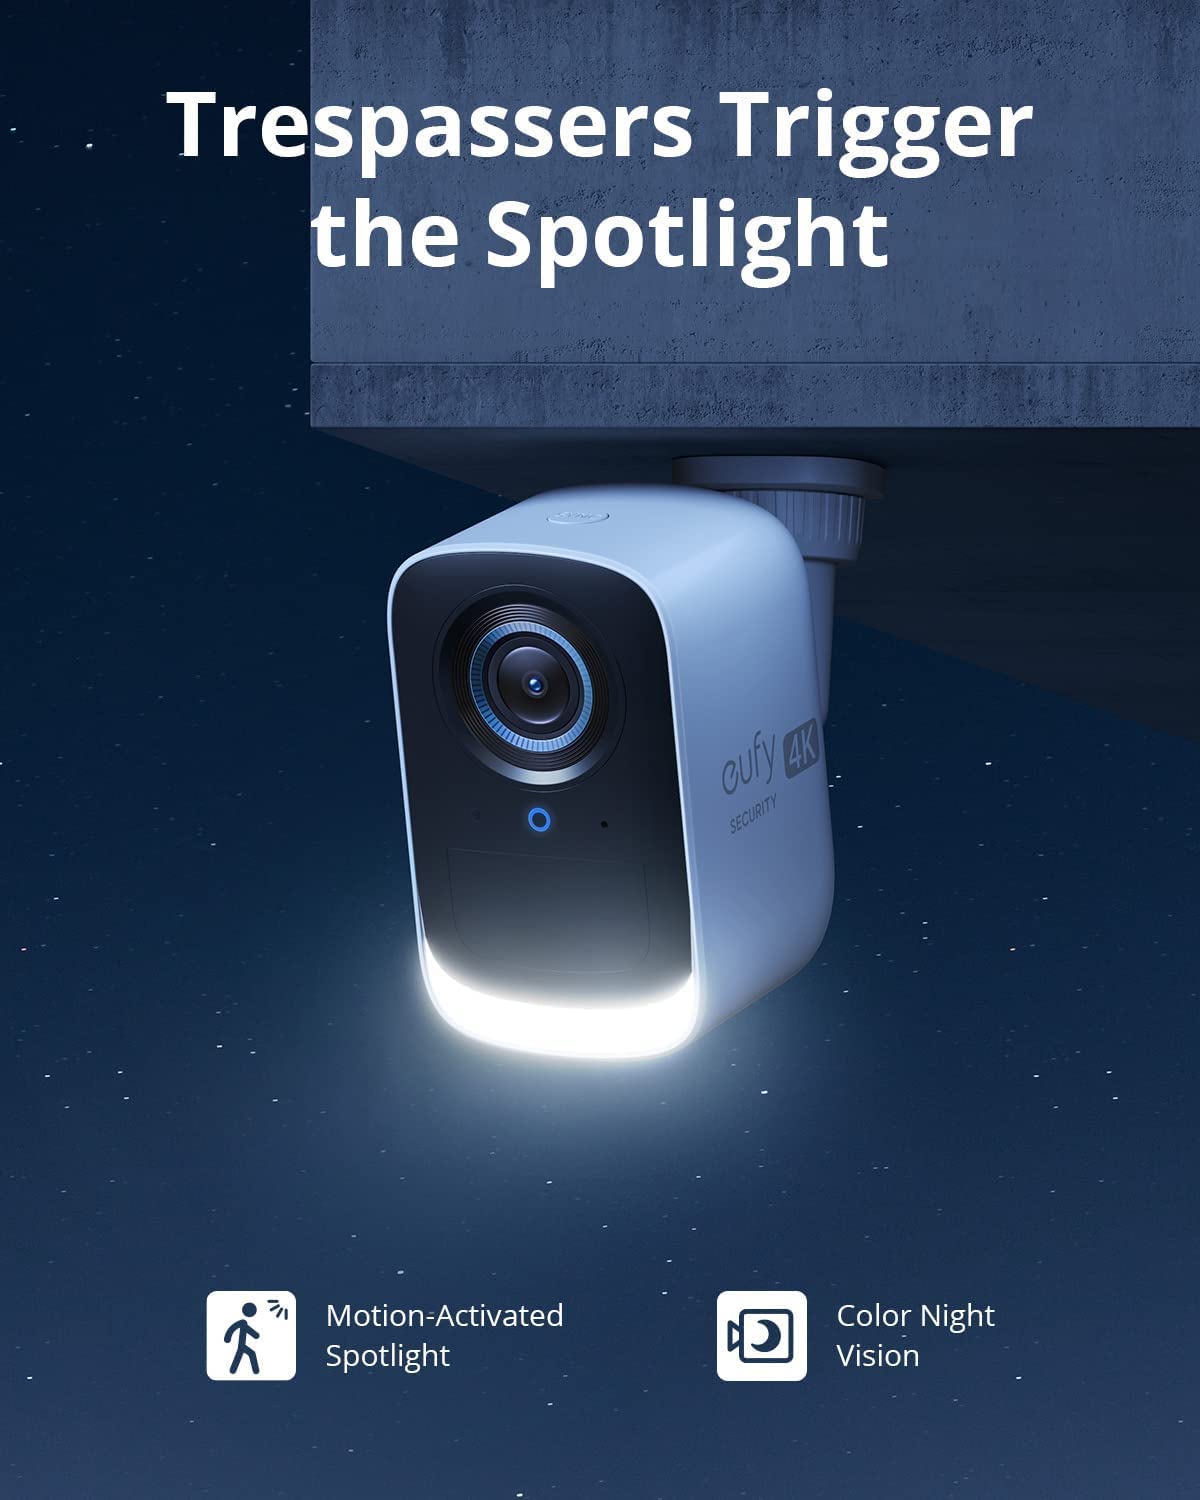 eufy Security eufyCam 3C 4-Cam Kit, Security Camera Outdoor Wireless, 4K Camera, Expandable Local Storage up to 16TB, Face Recognition AI, Spotlight, Color Night Vision, No Monthly Fee